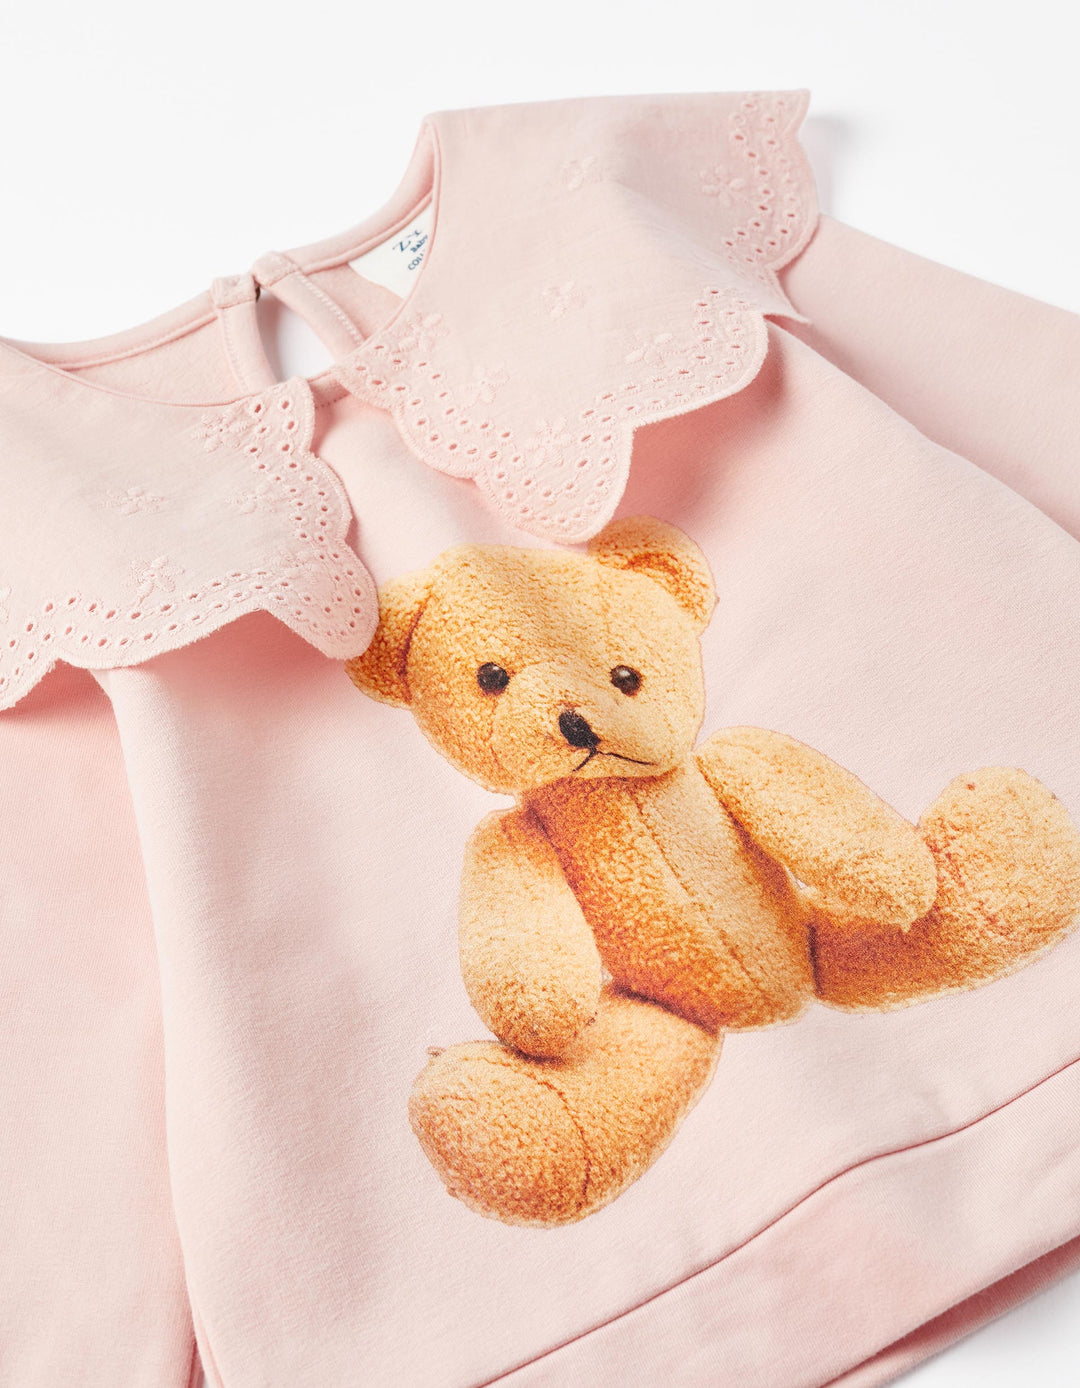 Cotton Sweatshirt with English Embroidery for Baby Girls 'Teddy Bear', Pink